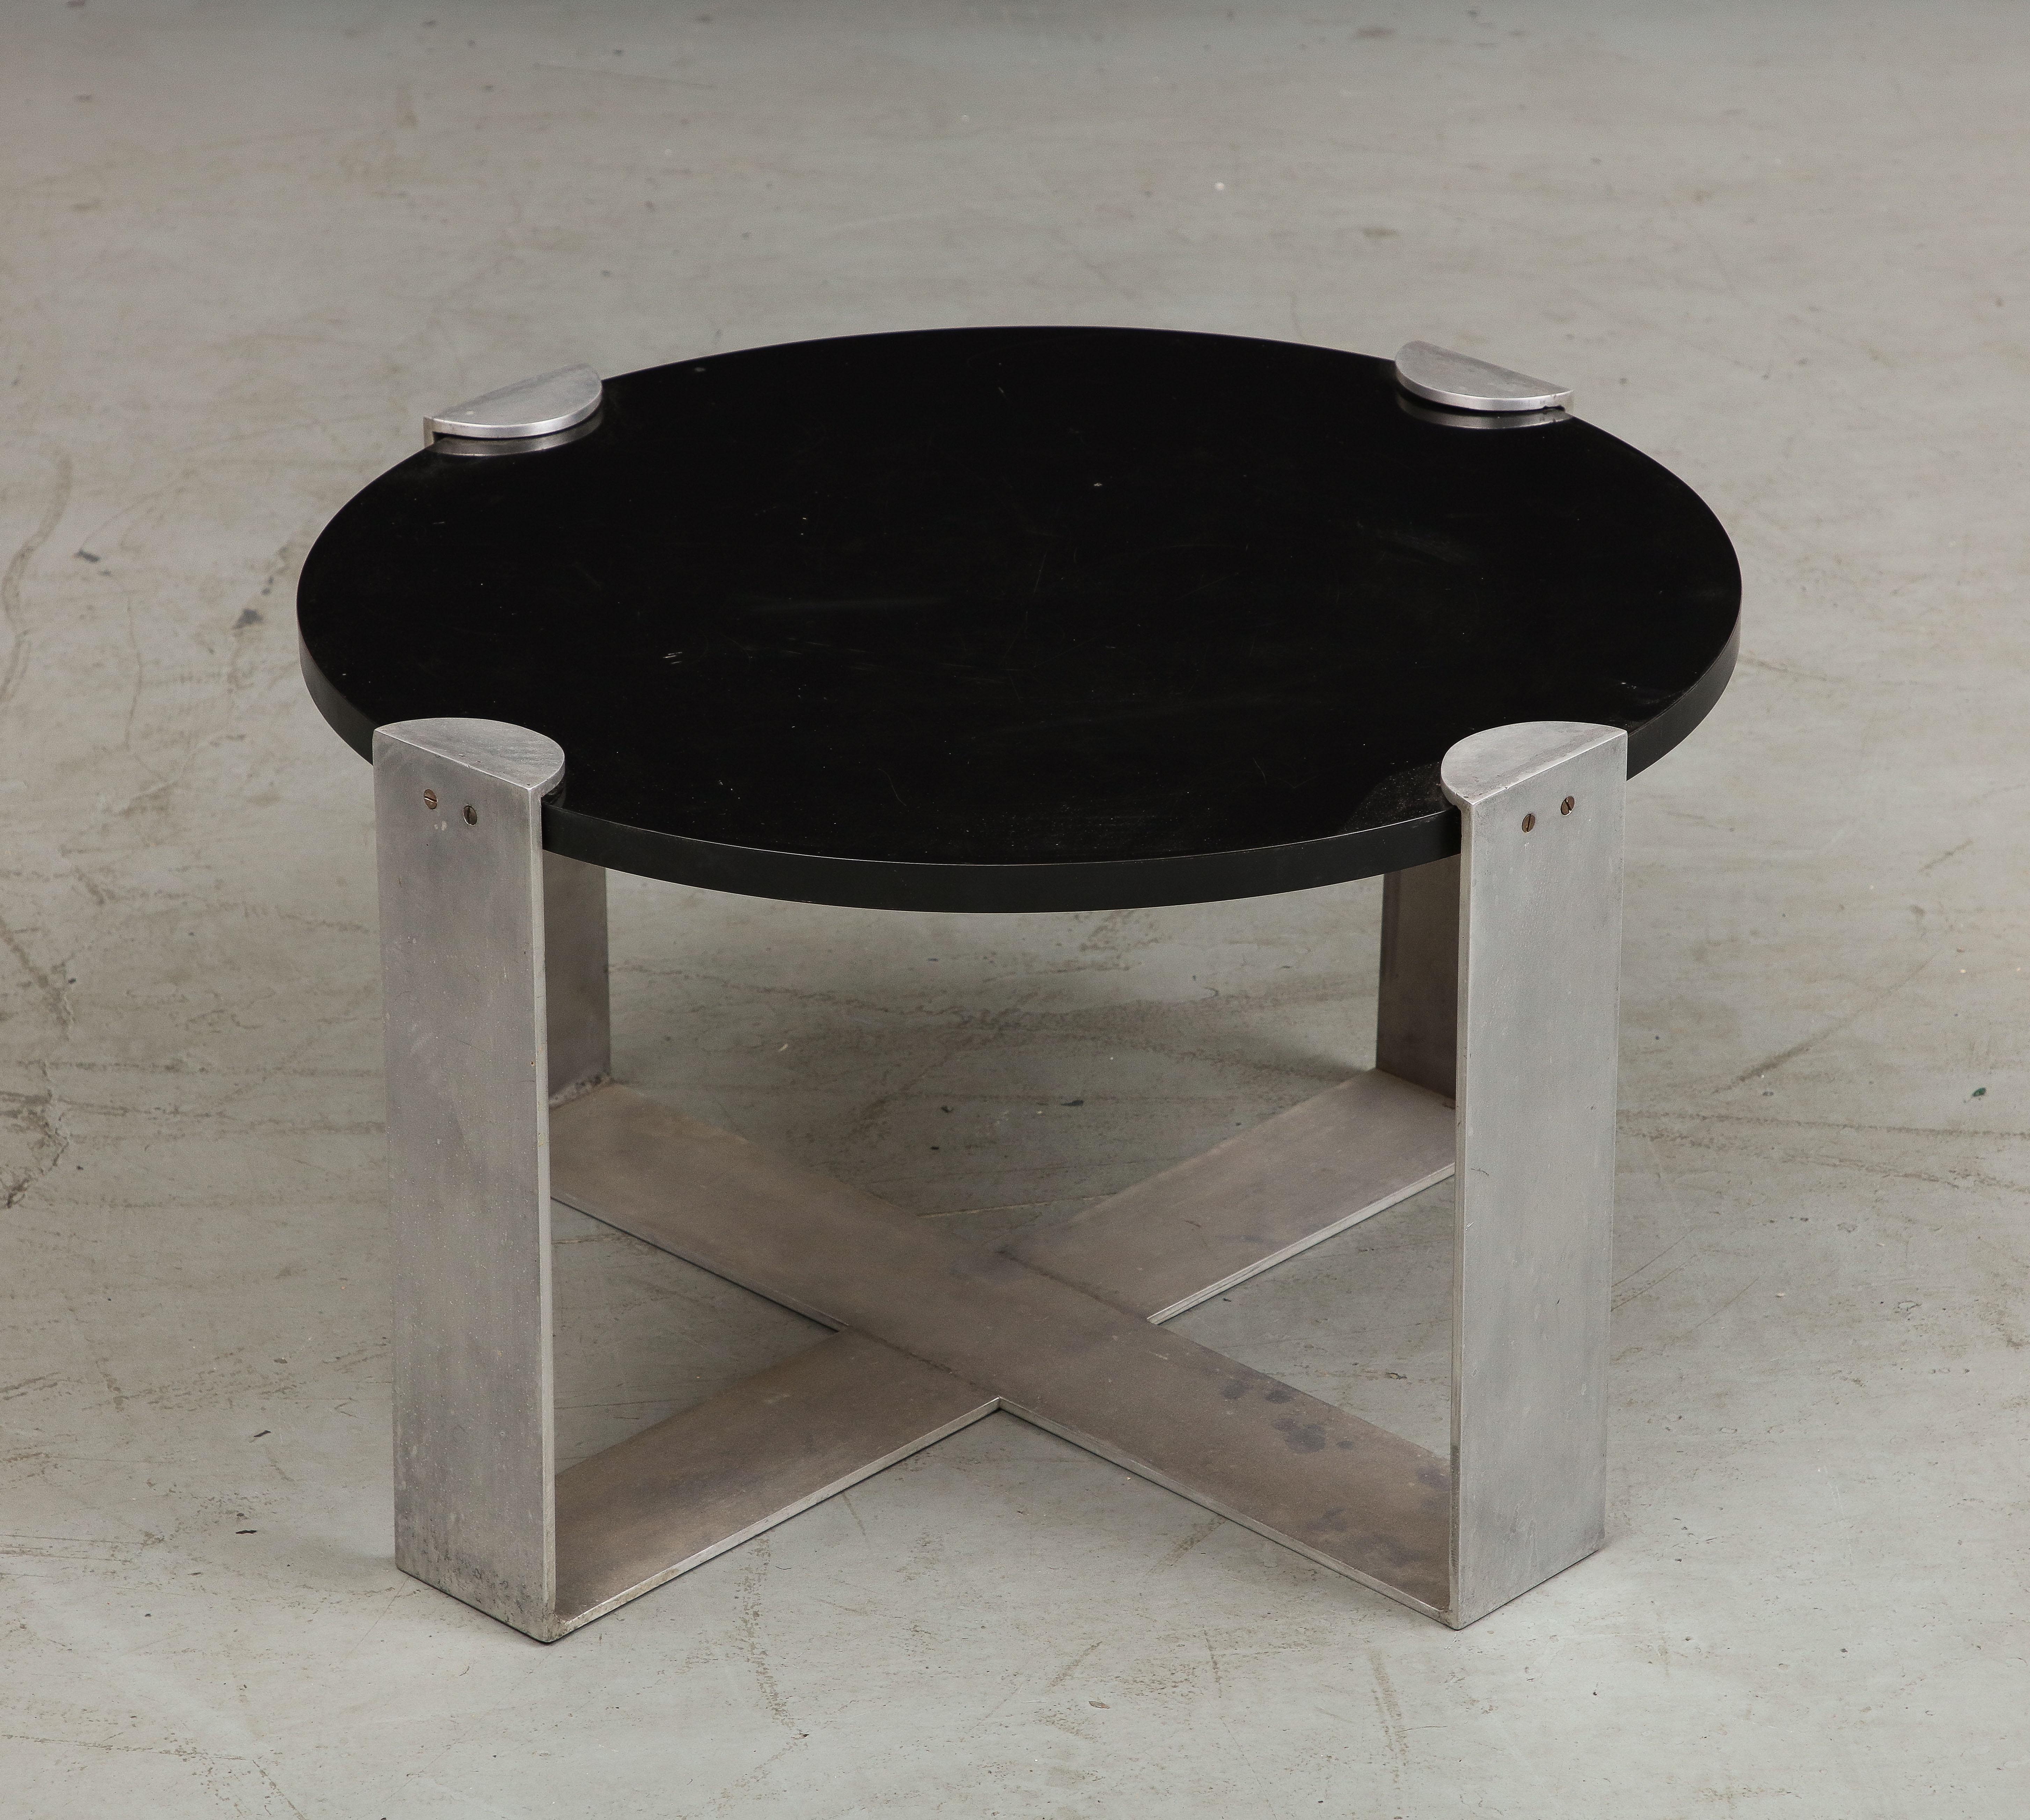 Midcentury Polished Steel and Wood Coffee Table, c. 1950 For Sale 2